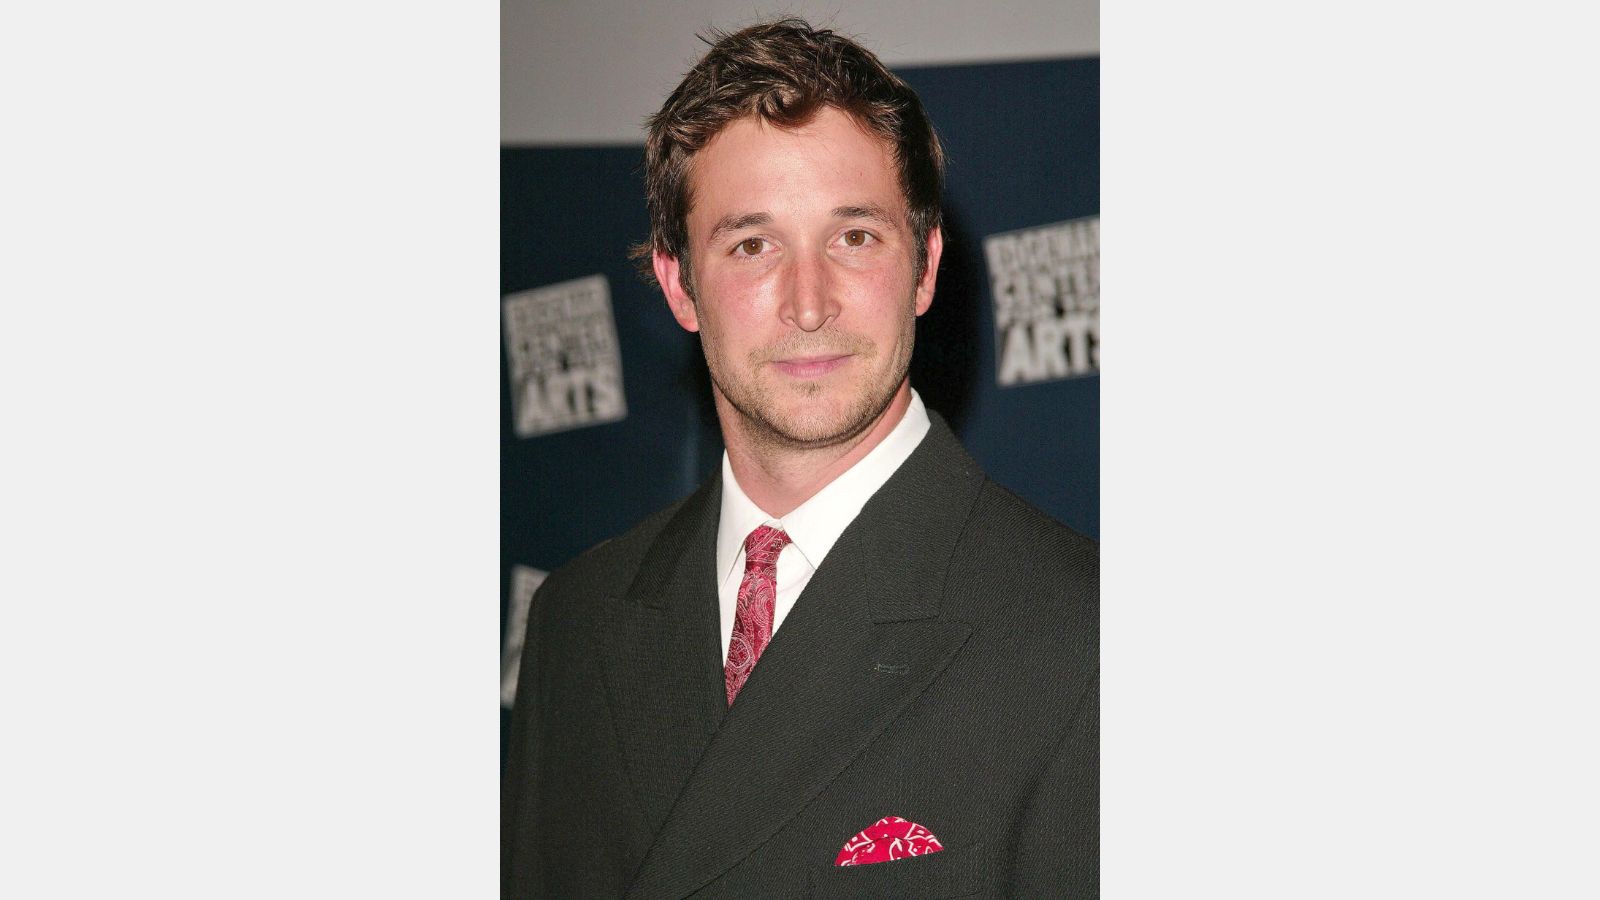 The actor Noah Wyle.